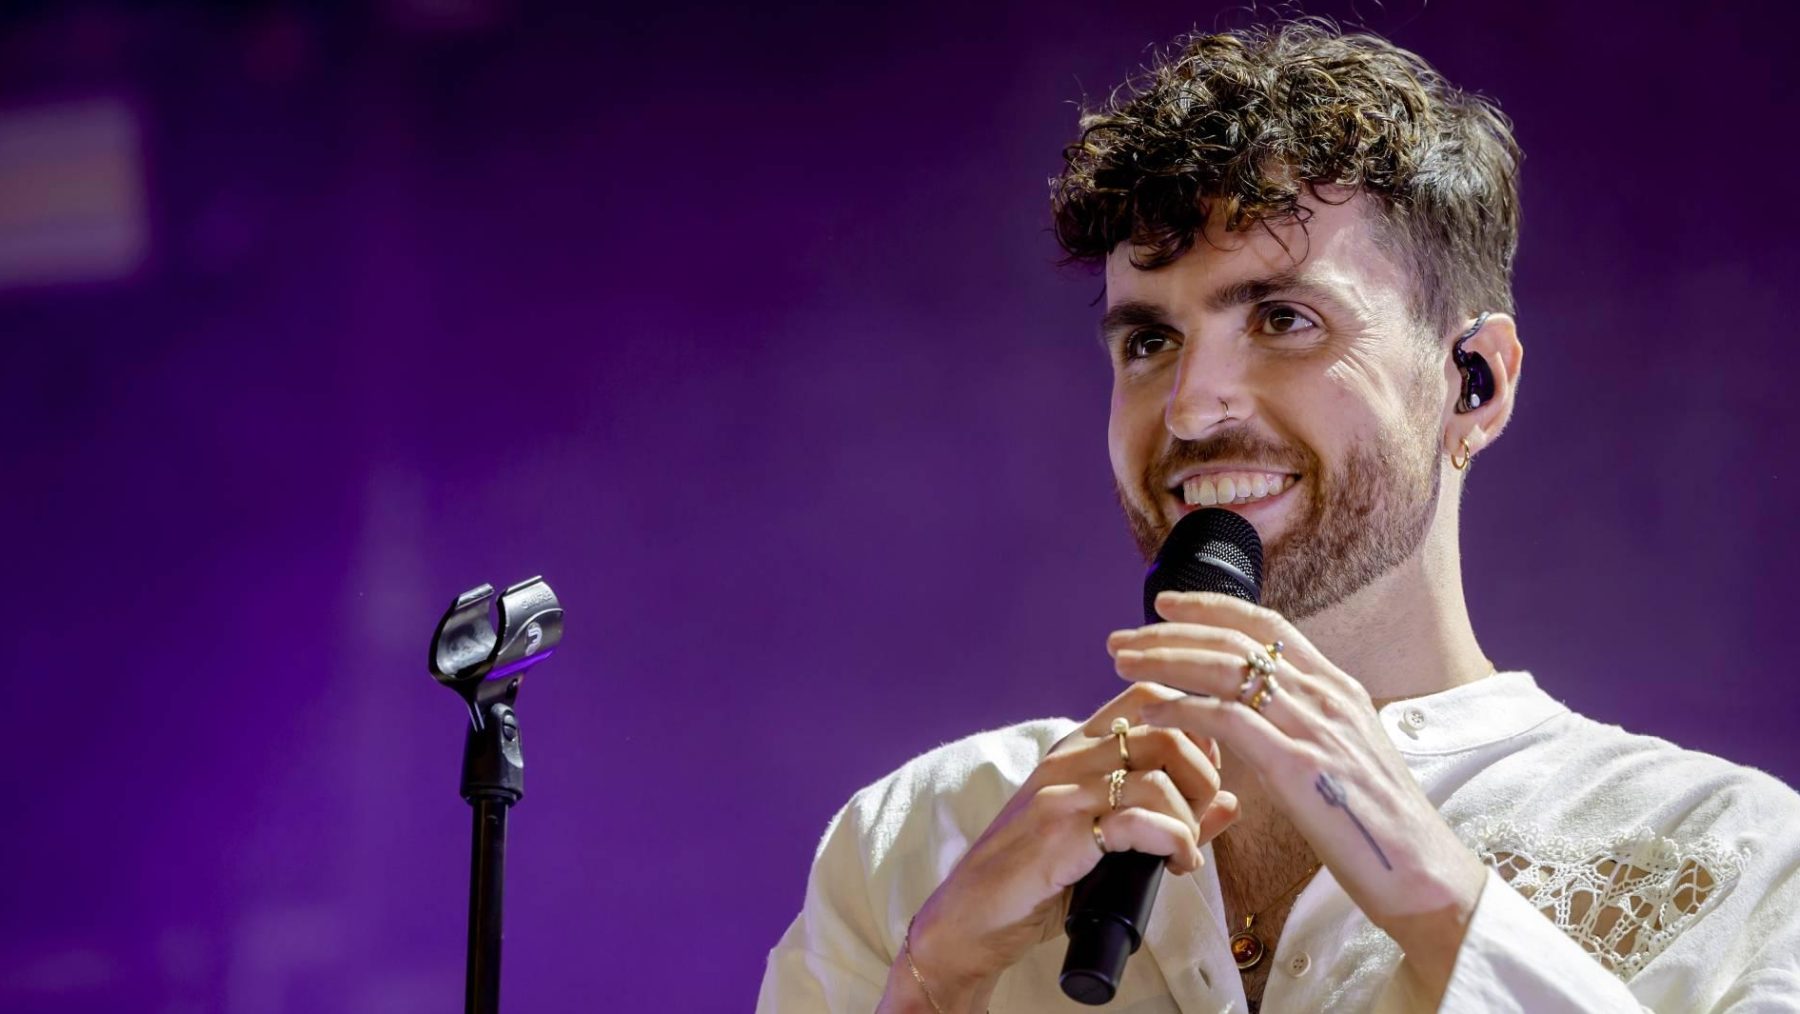 Duncan Laurence wint als coach Vlaamse 'The Voice Kids'